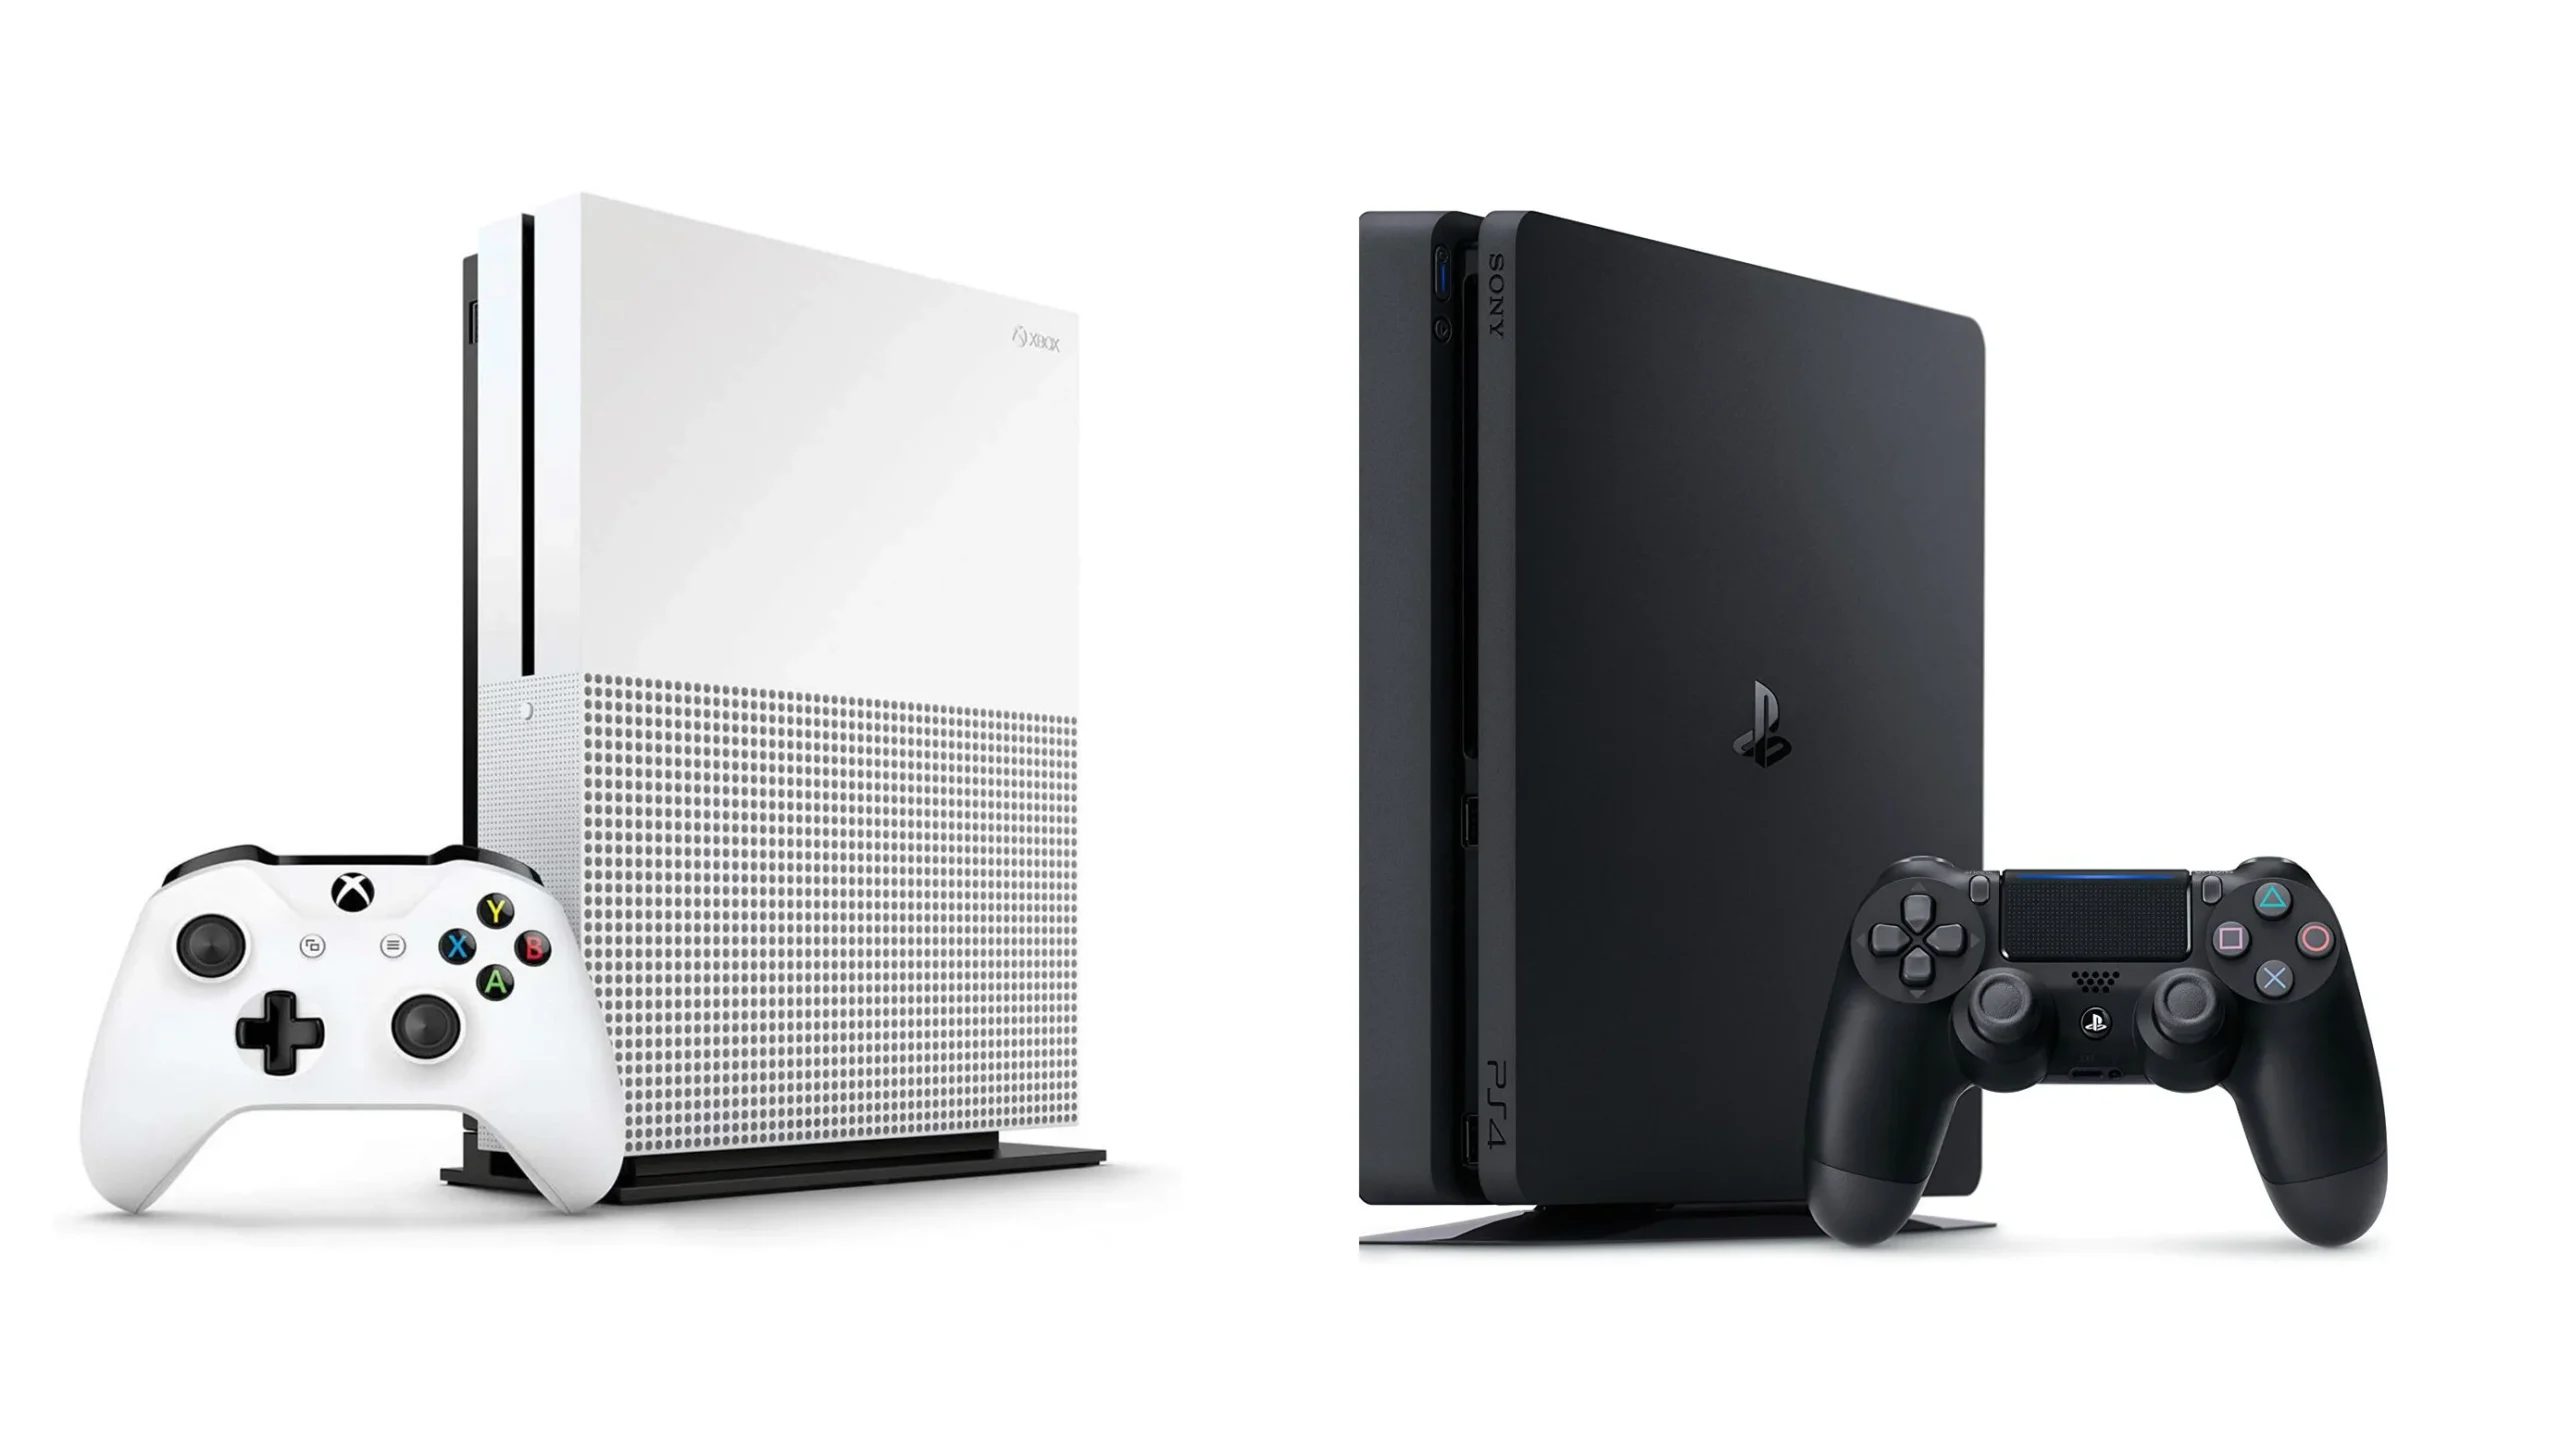 Should You Get a PS4 Pro or an Xbox One X?